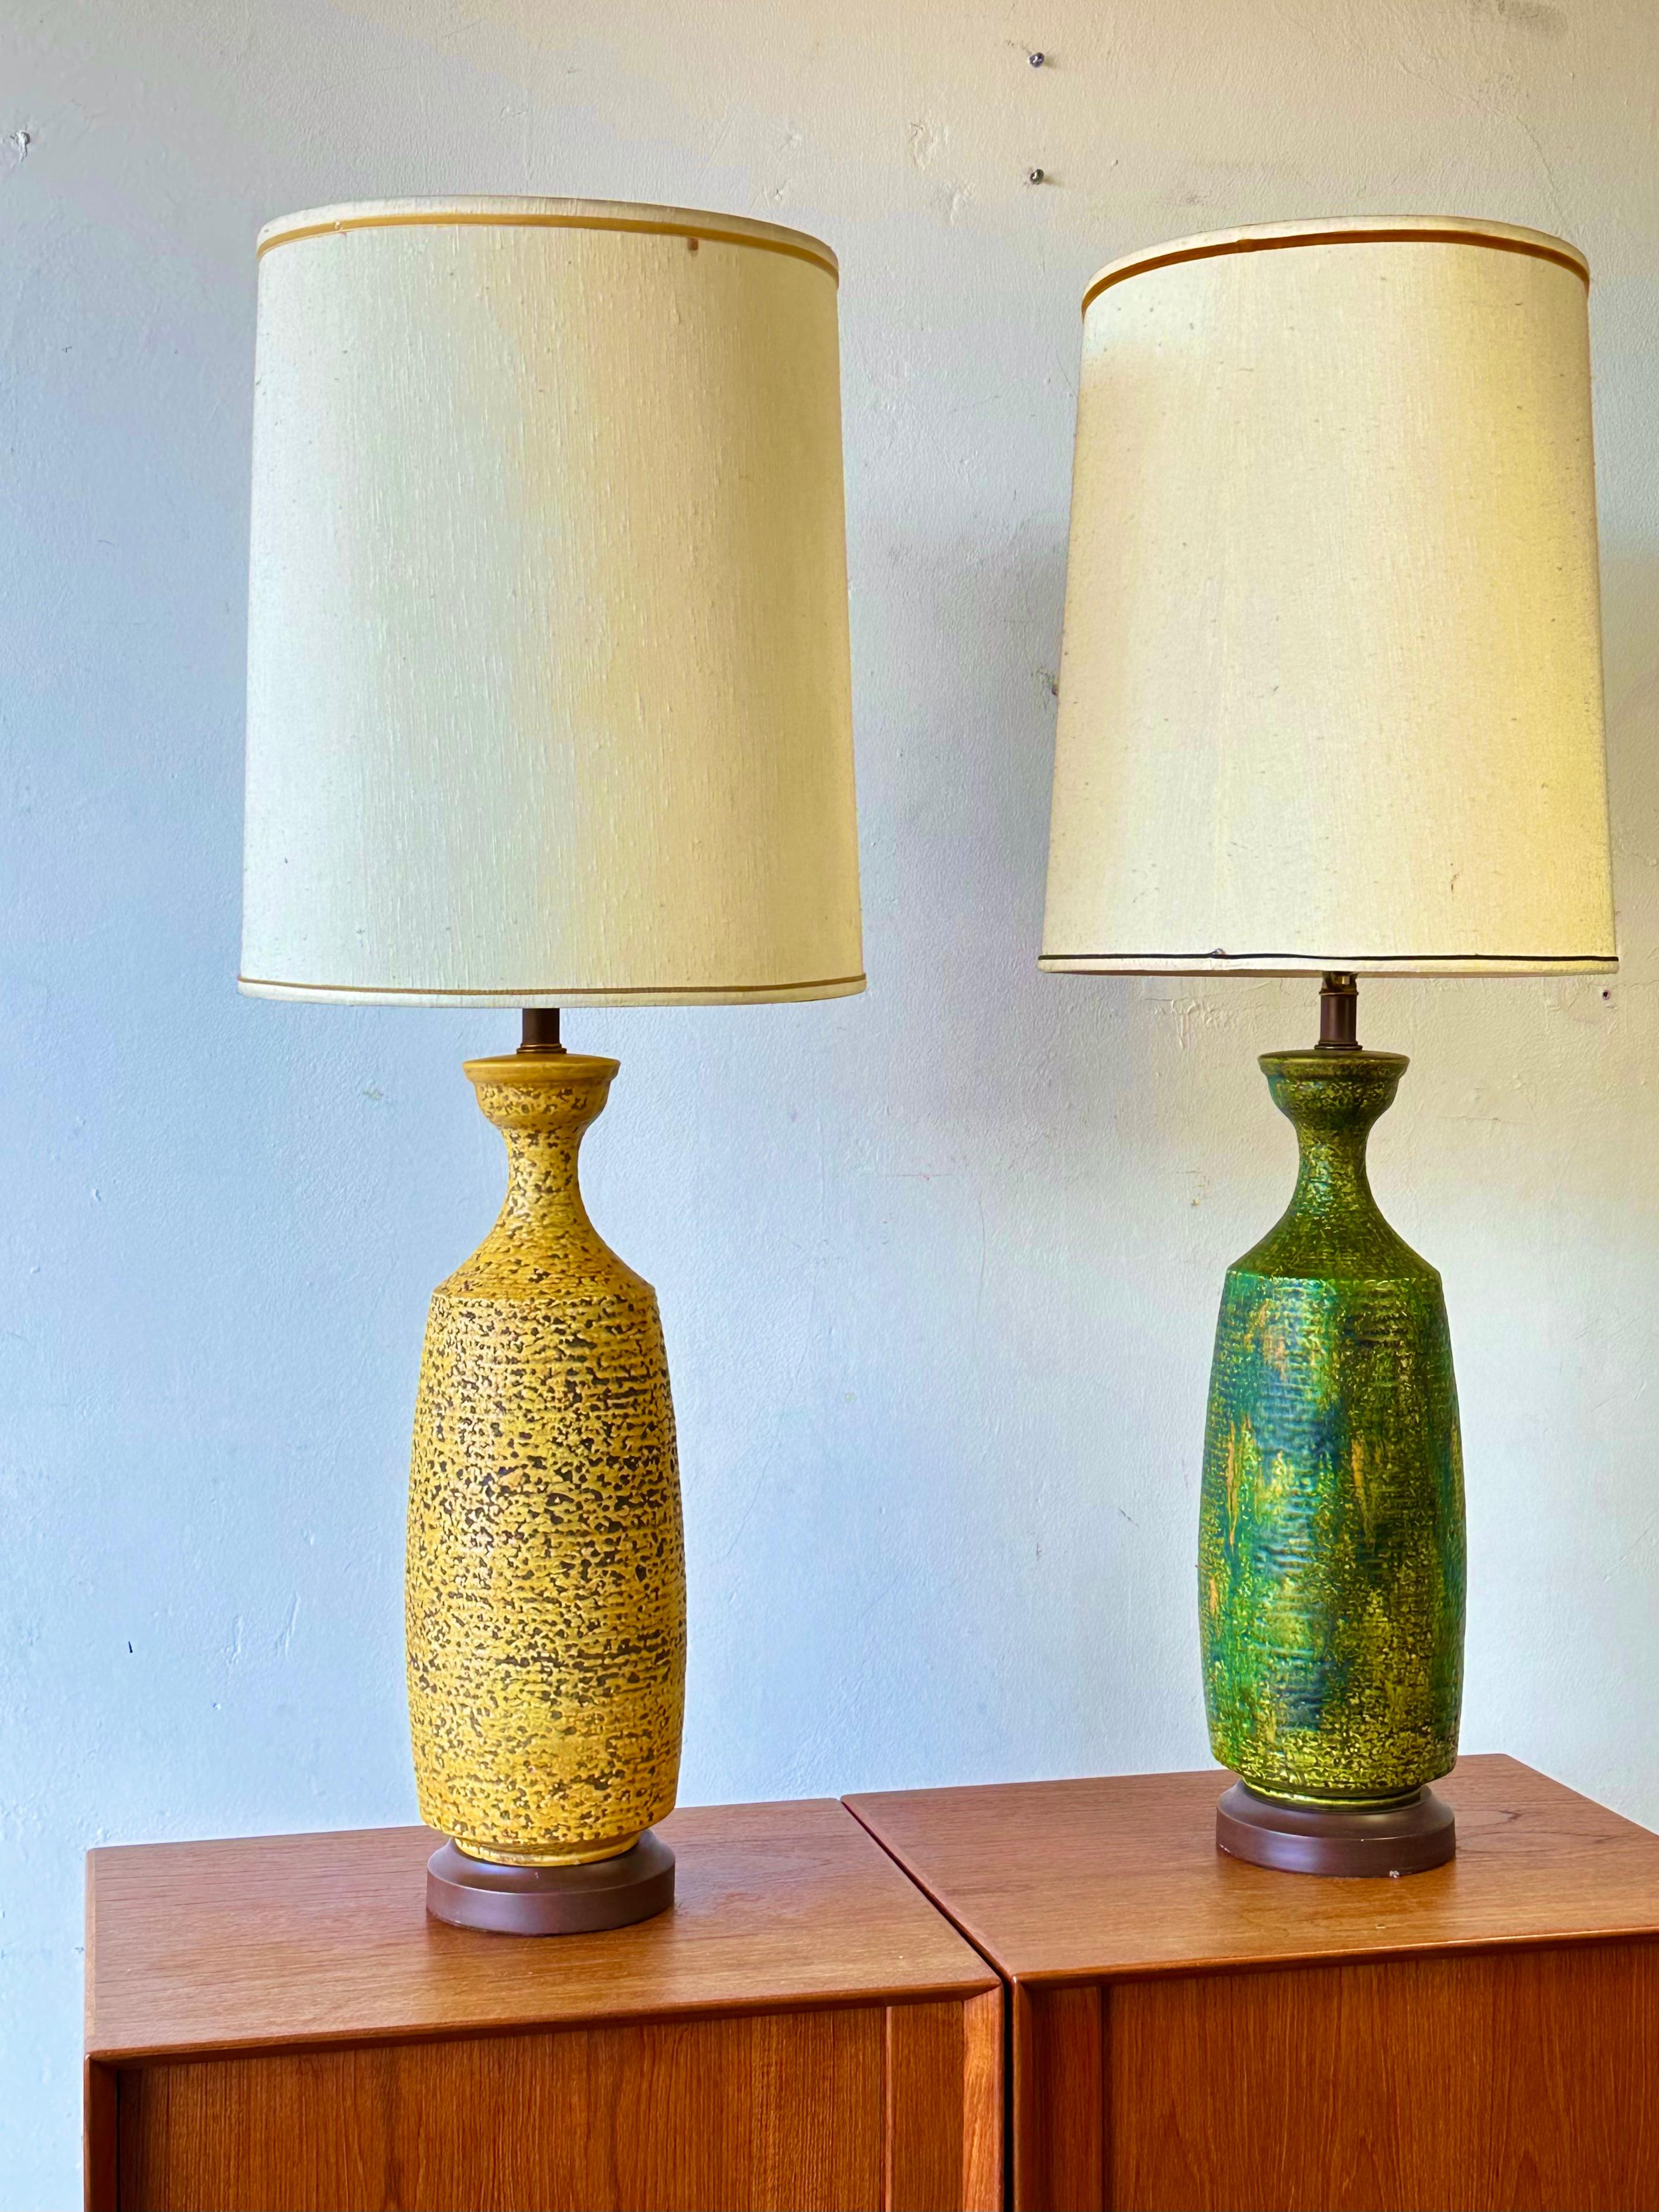 Mid-20th Century Pair of Mid-Century Modern Lemon & Lime Ceramic Table Lamps Yellow Green For Sale